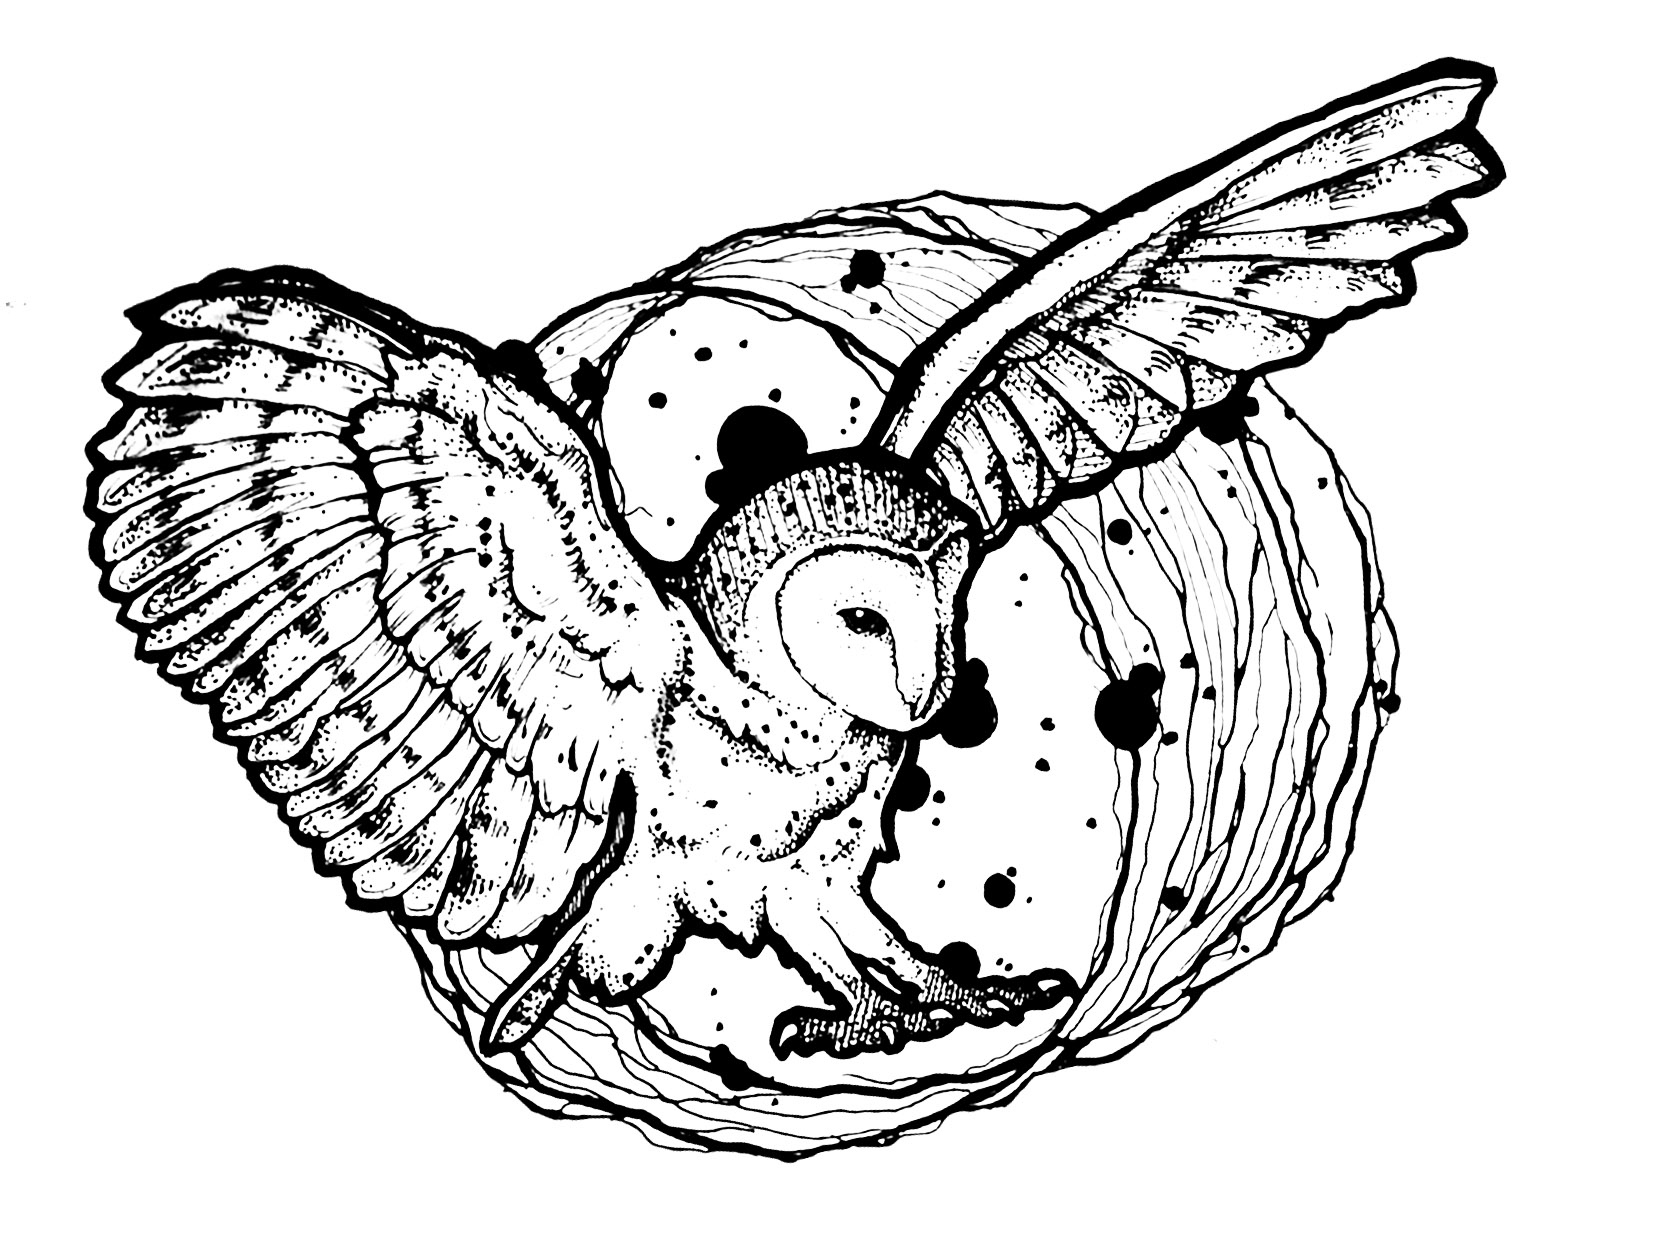 Owl drawing to print and color